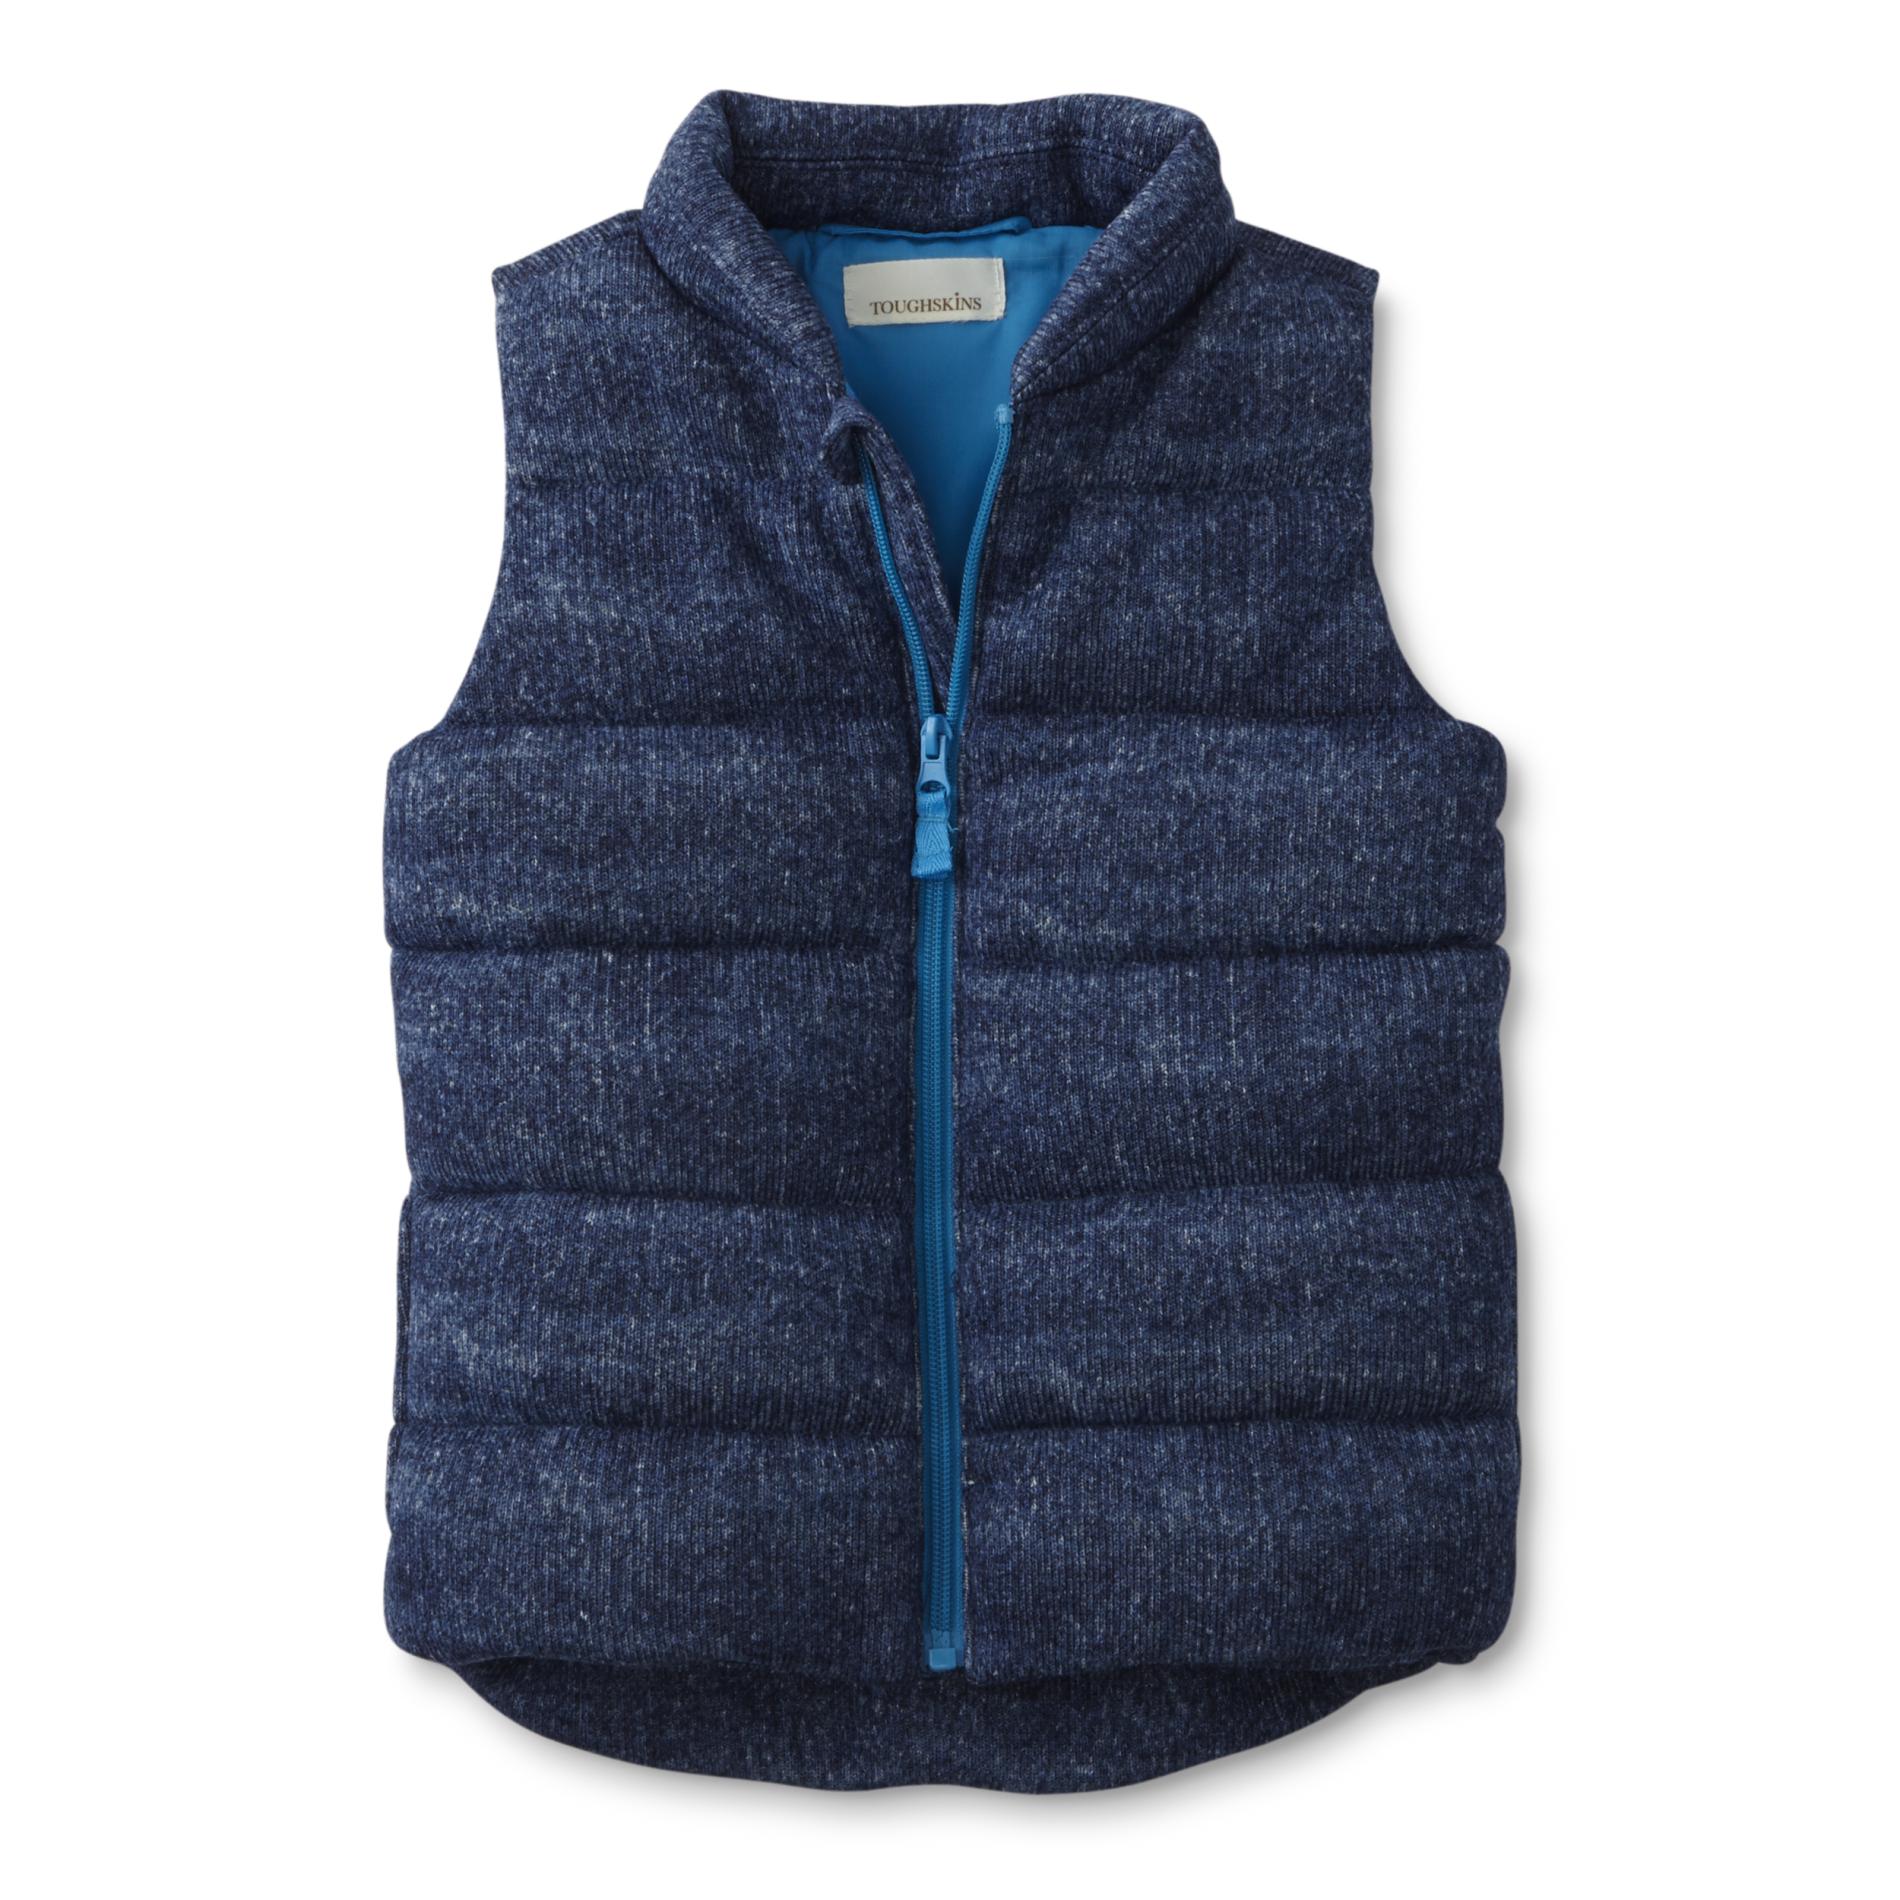 Toughskins Boys' Quilted Puffer Vest